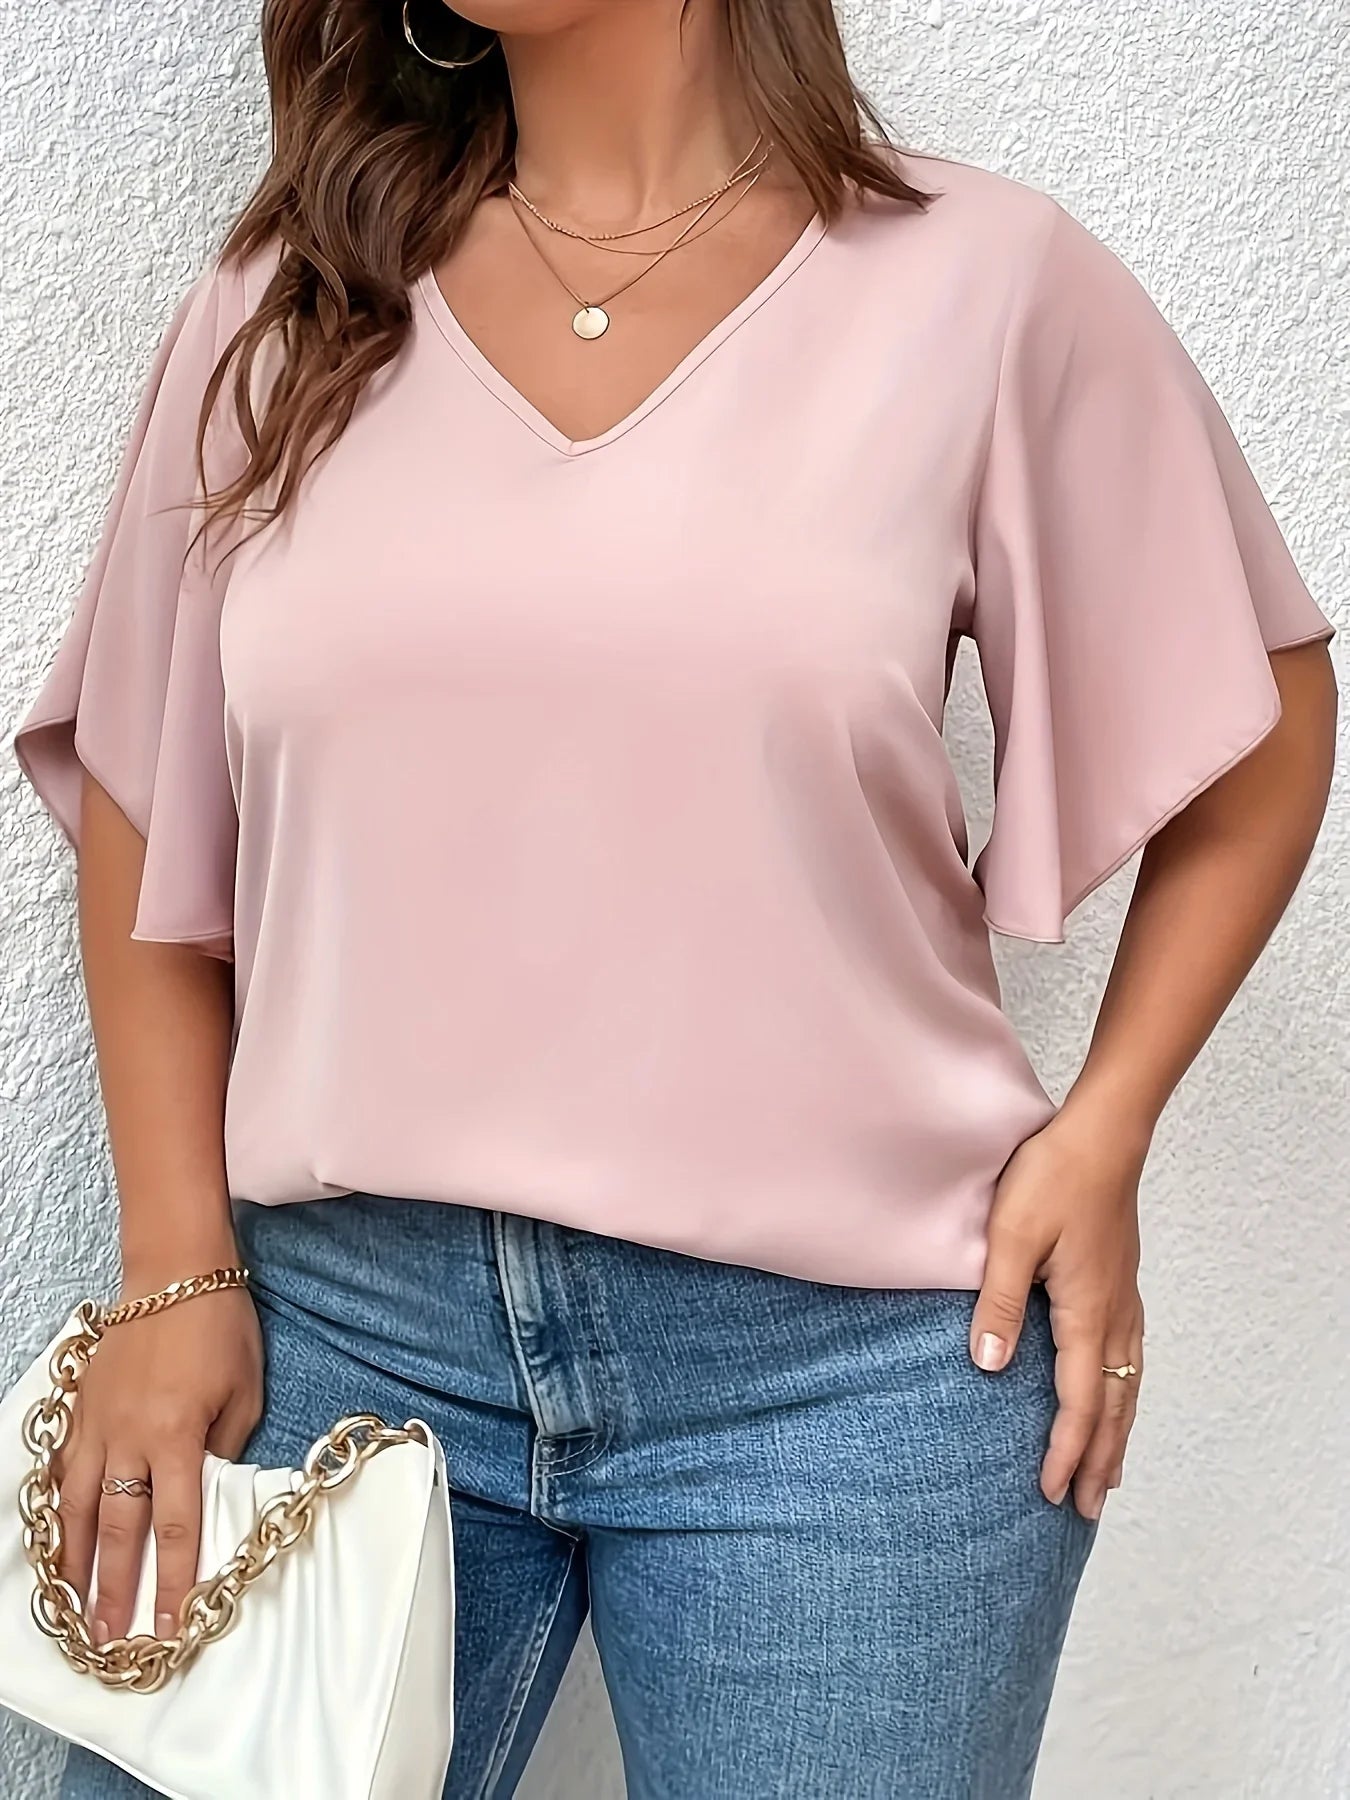 Women's T-shirt Solid Color V Neck Bell Sleeve Blouse Slight Stretch Casual Pullovers Shirt Top